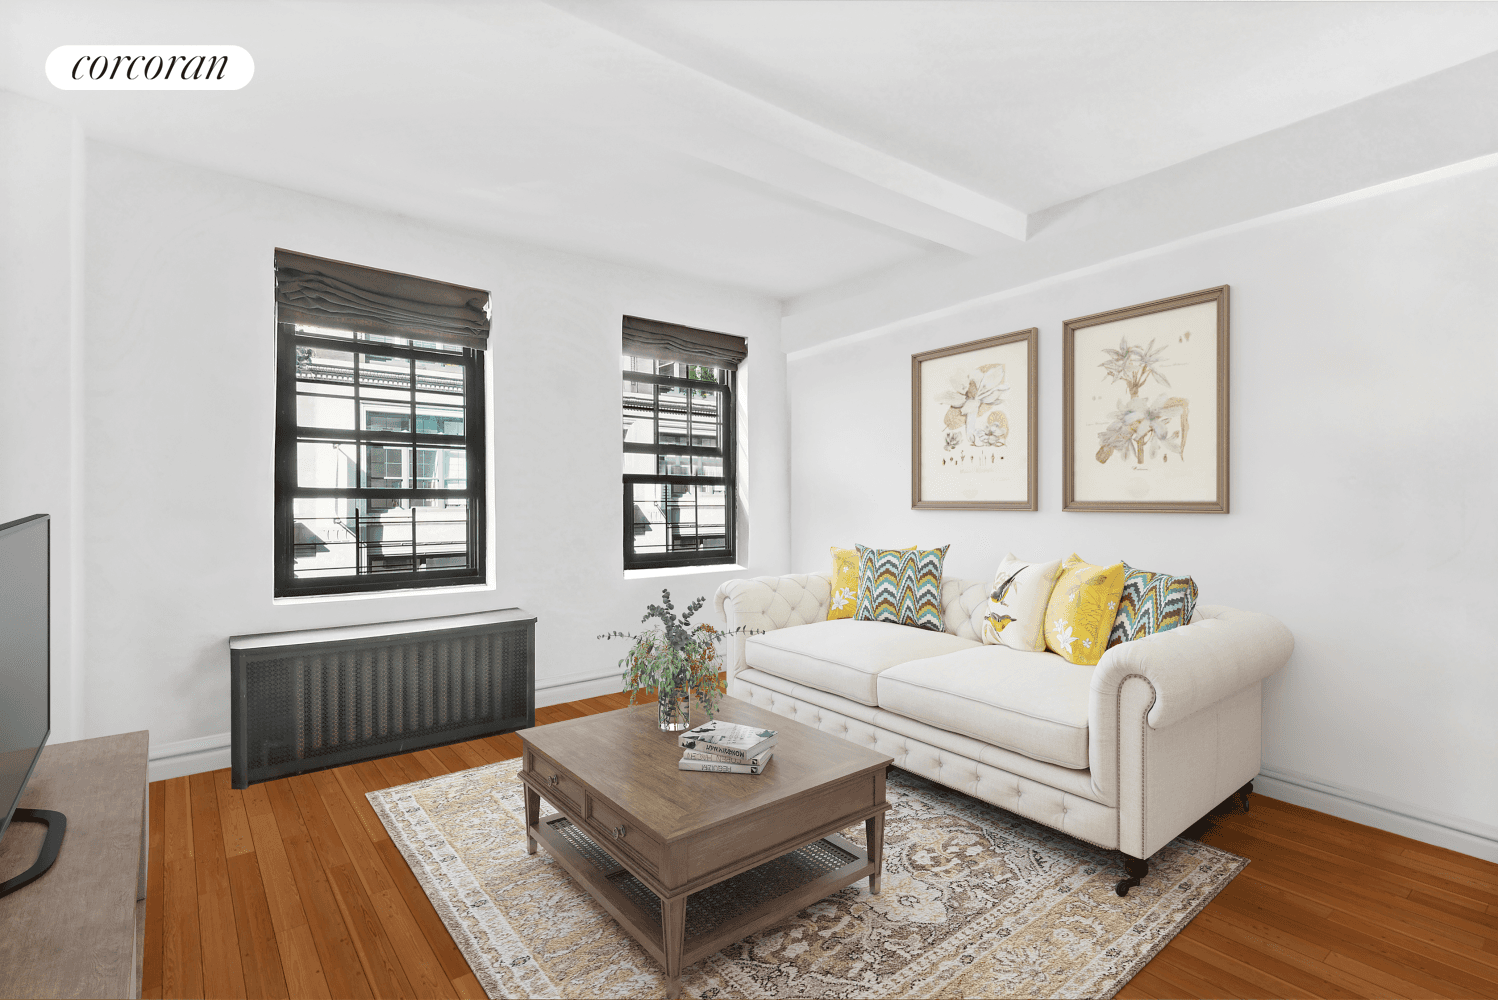 Apartment 3B is nestled in the highly sought after Gramercy Park neighborhood.